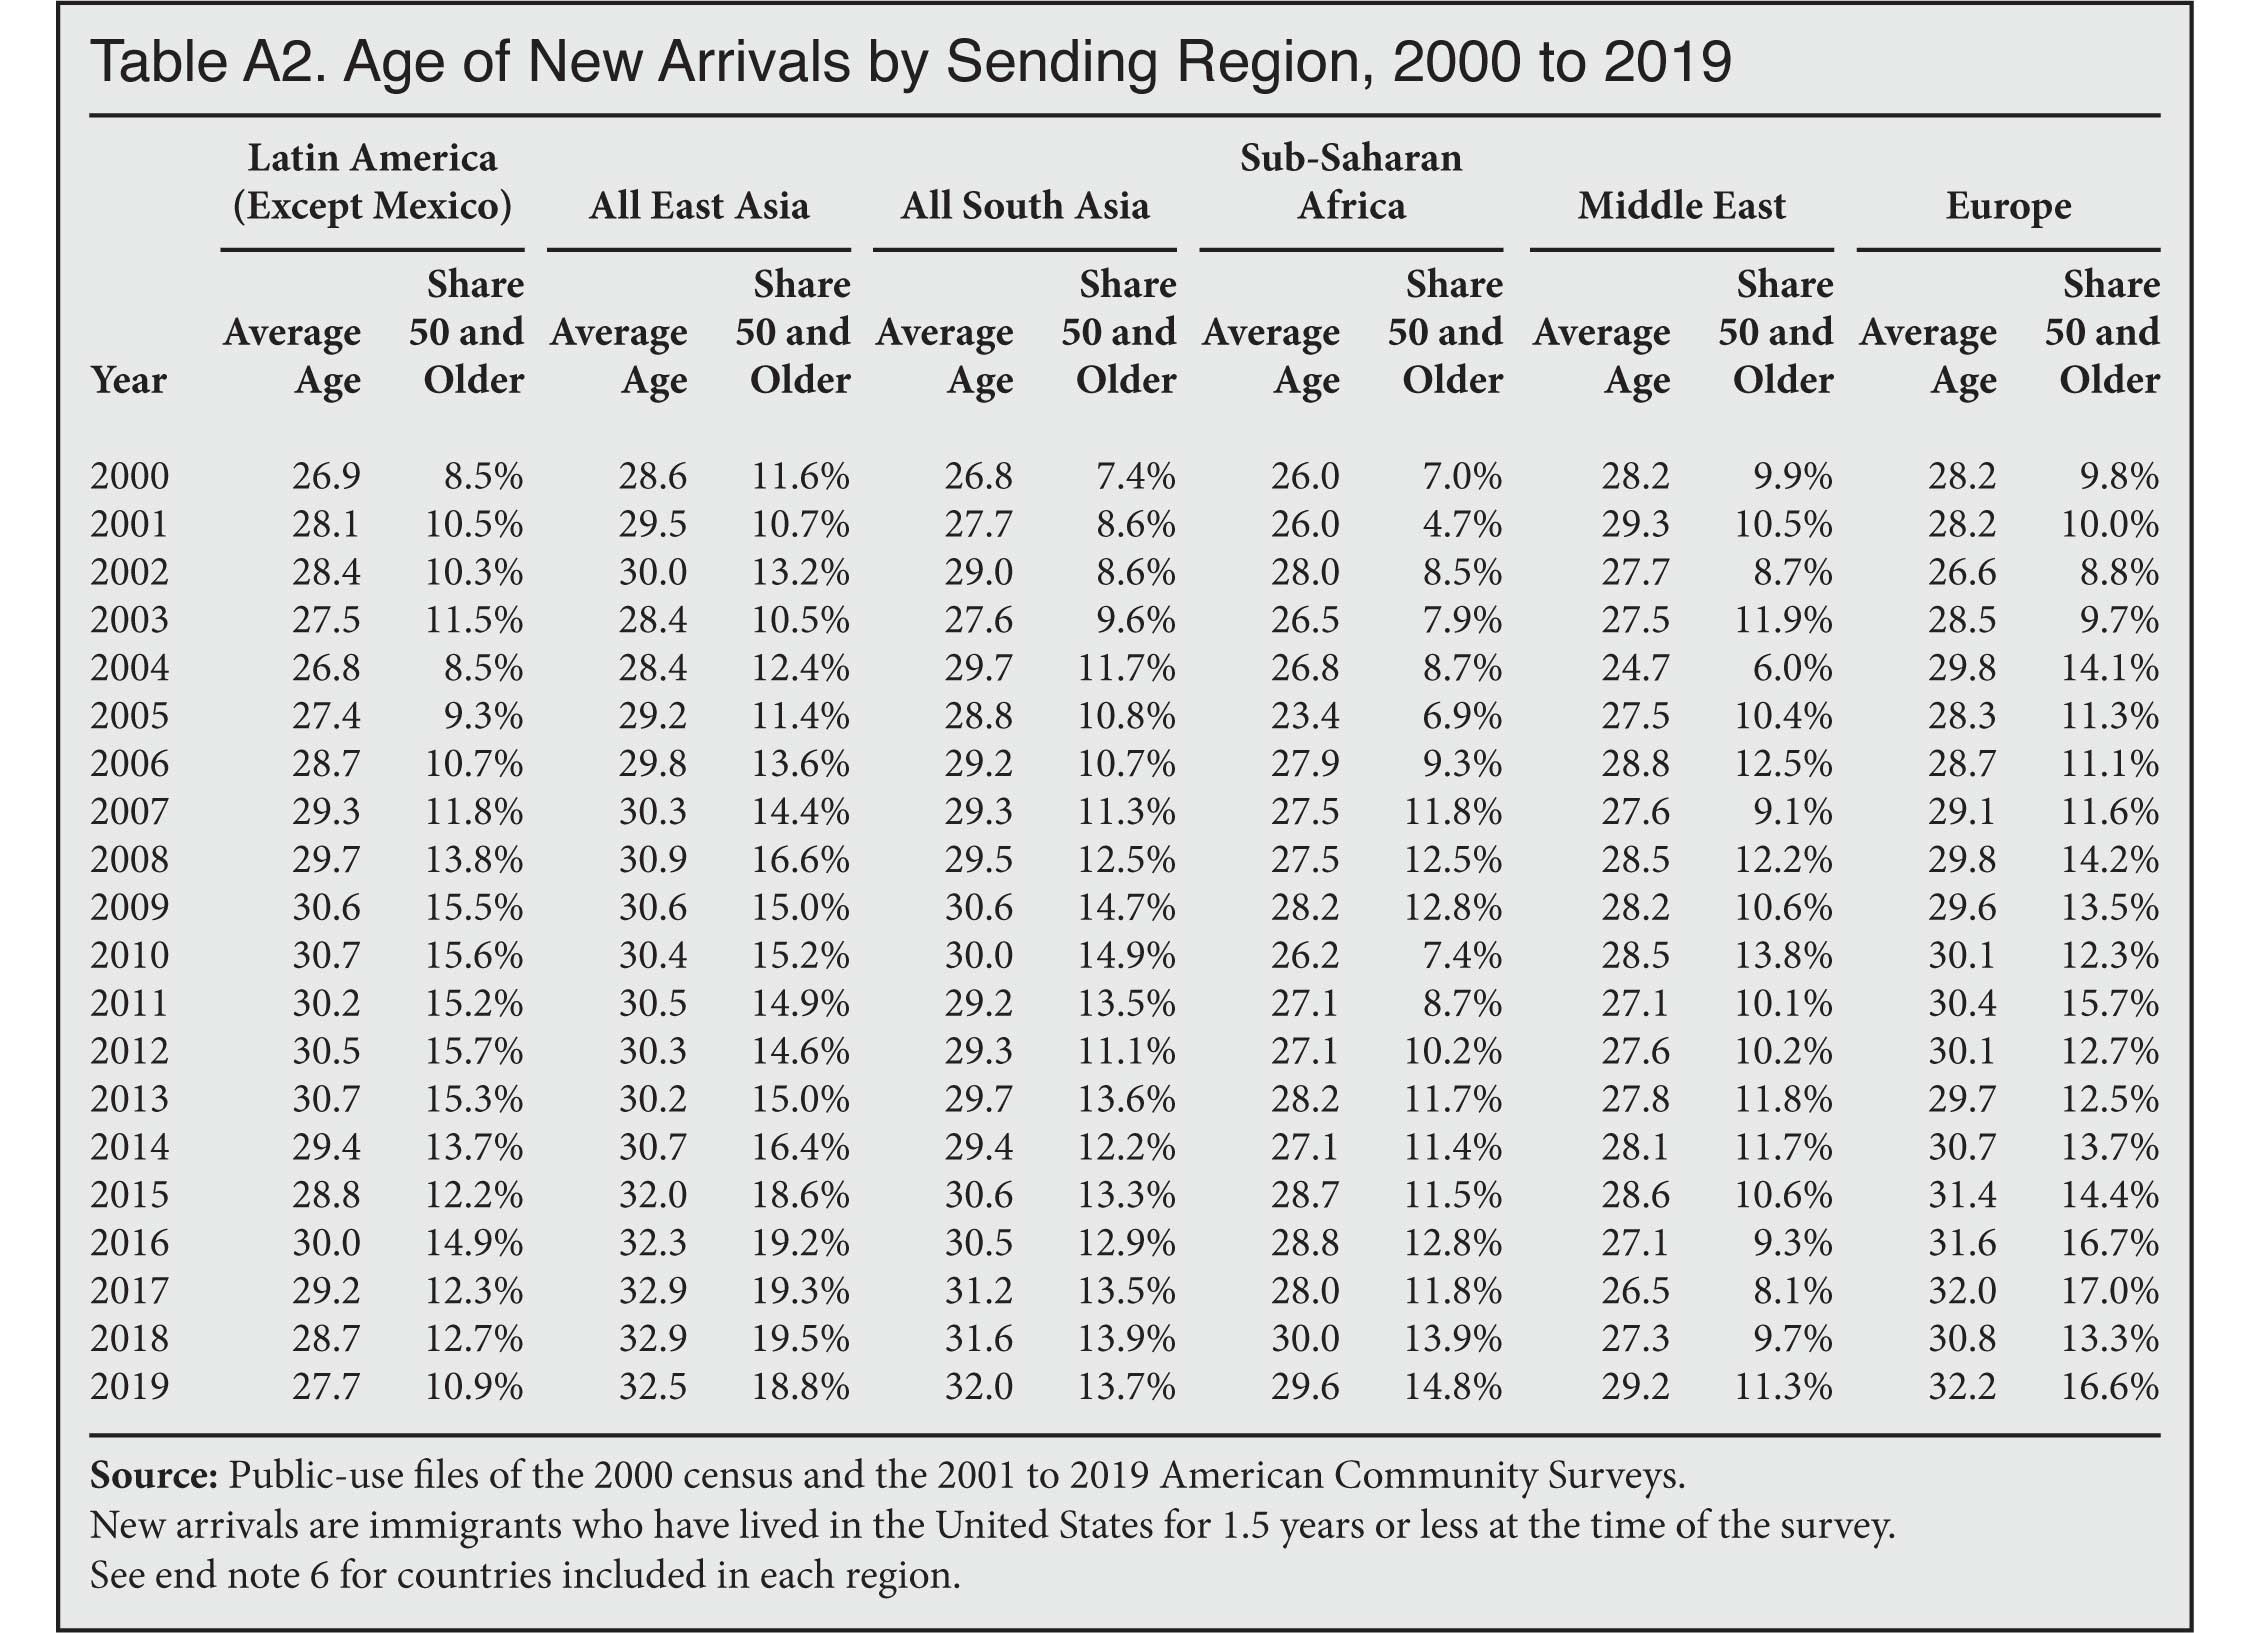 Table: Age of new arrivals by sending region, 2000 to 2019